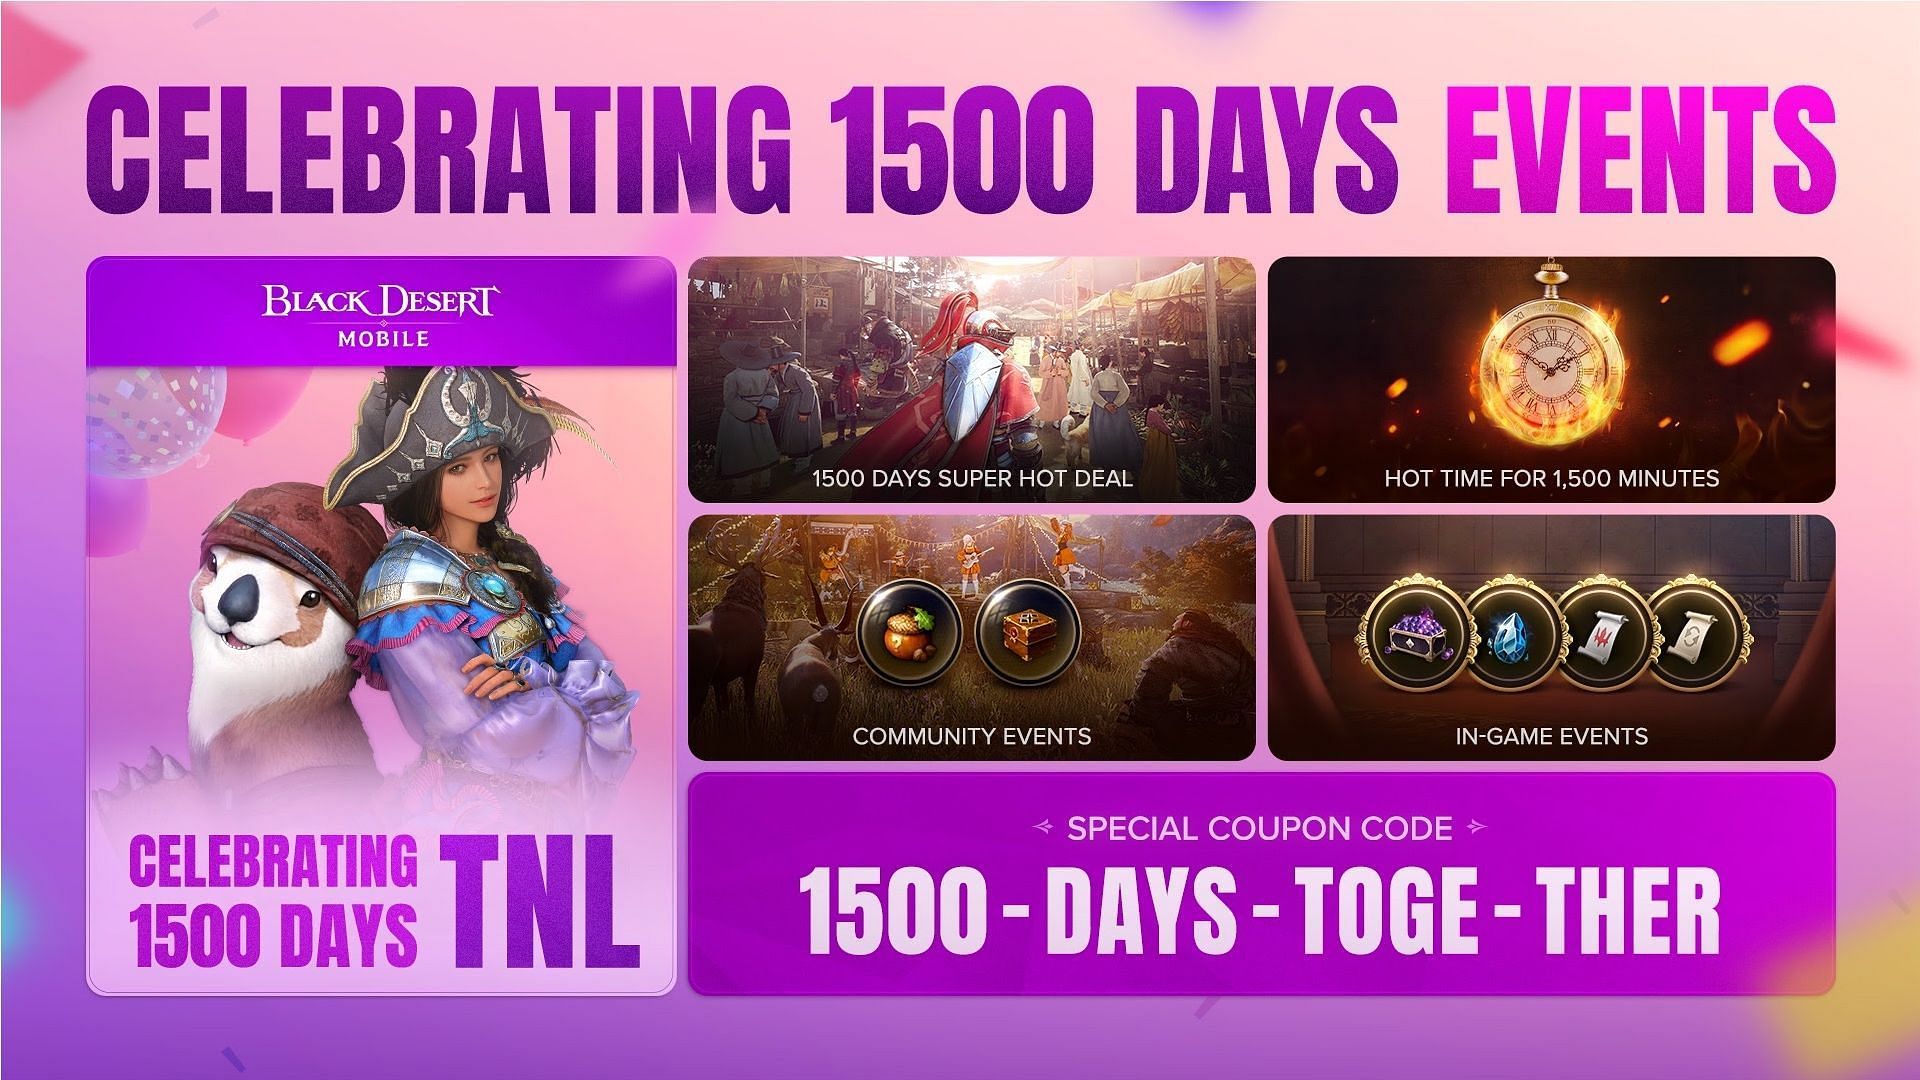 The 1500 days together coupon code brings many rewards for the Adventurers (Image via Pearl Abyss)